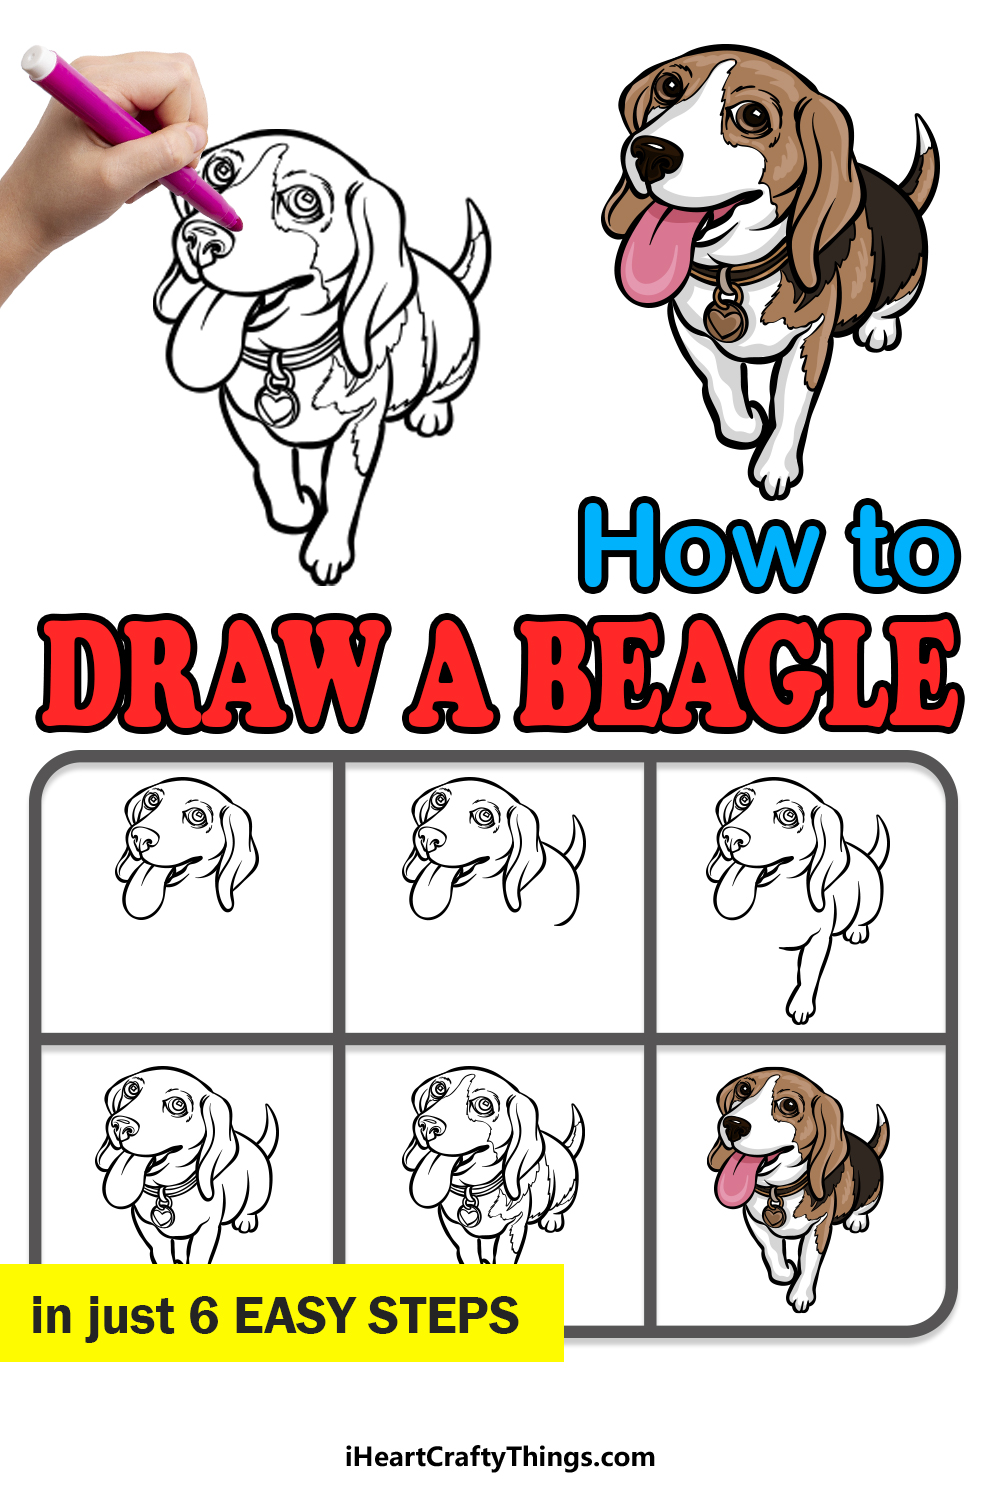 how to draw a Beagle in 6 easy steps